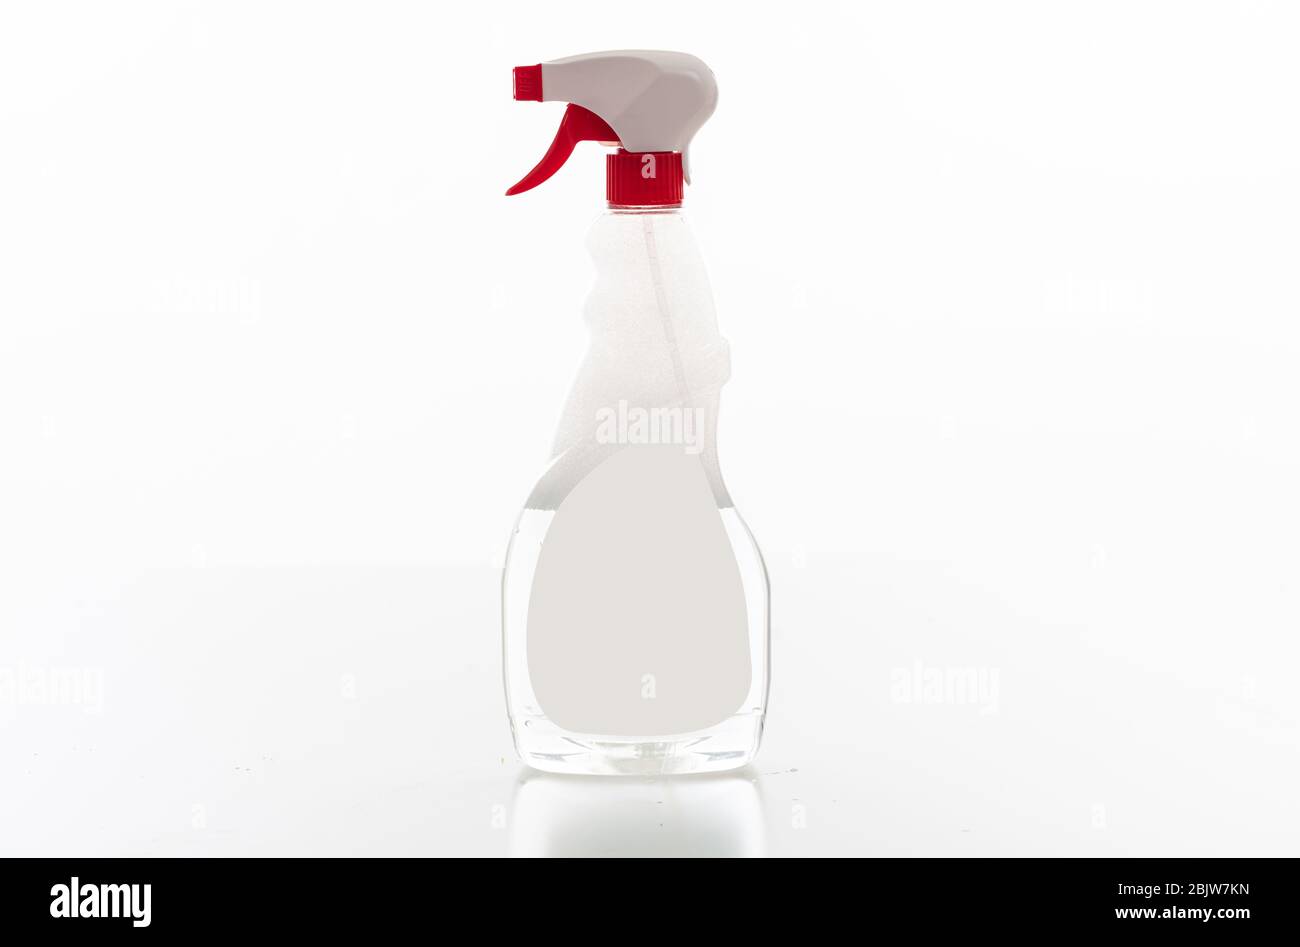 Cleaning spray bottle clear with red trigger isolated against white background. Chemical detergent product no name template, blank empty label, copy s Stock Photo